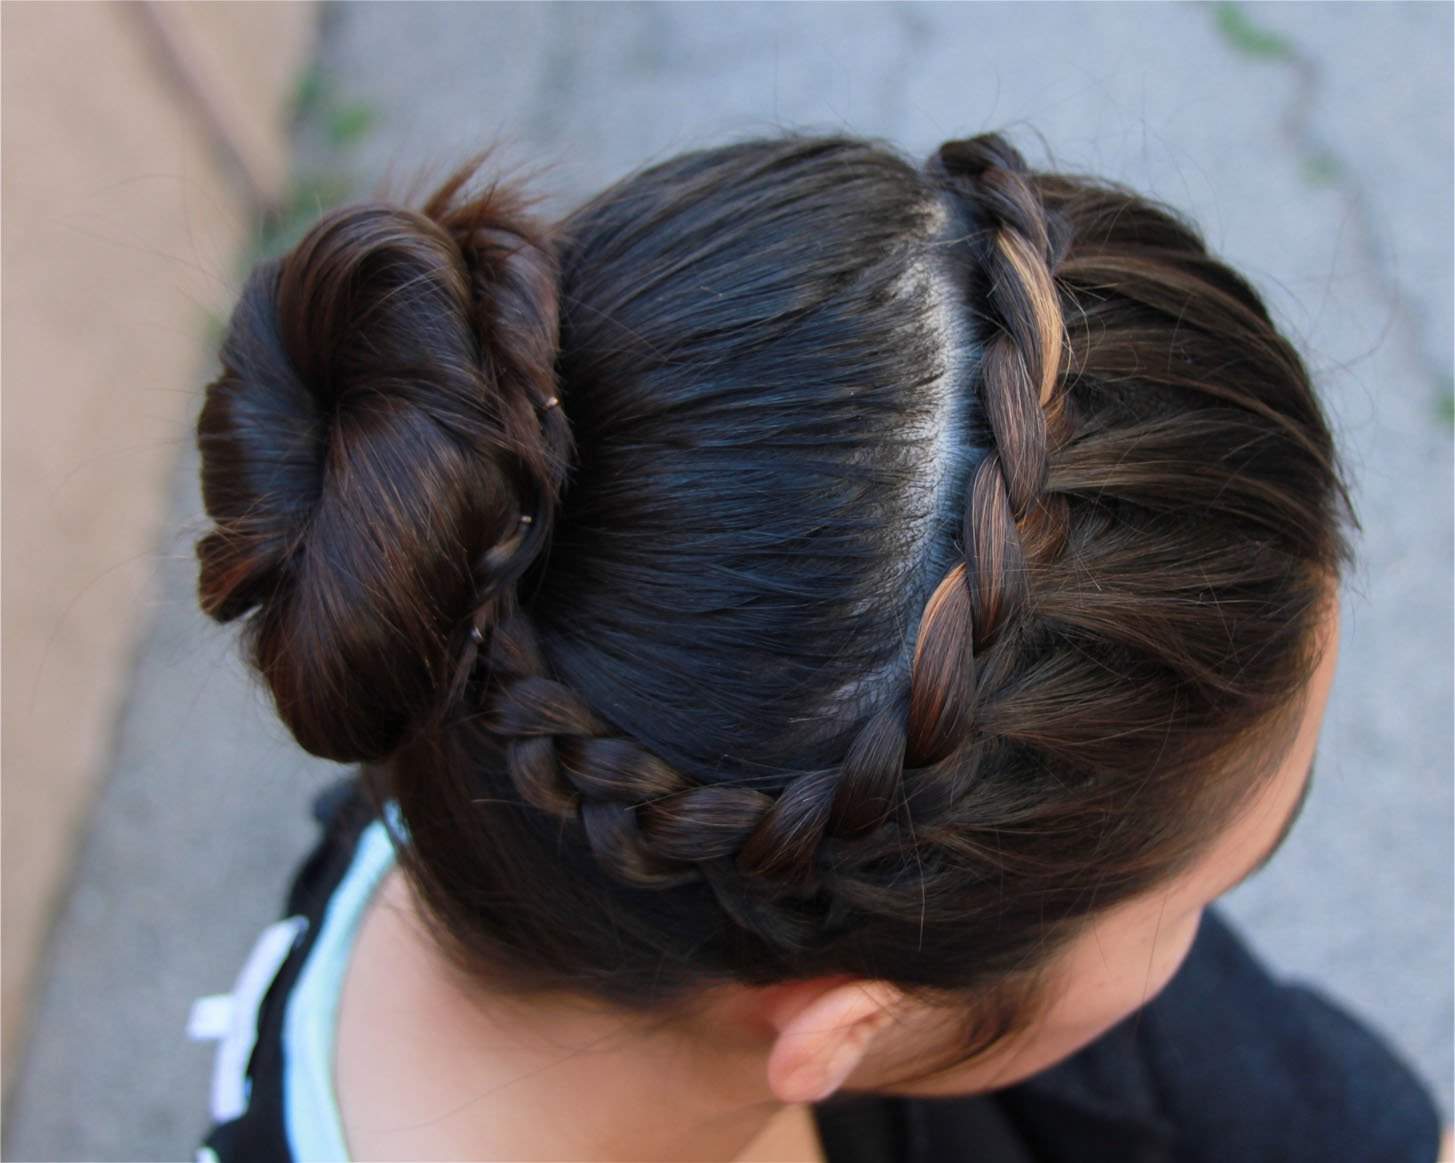 Easy Buns and Braided Hairstyles Unveiled Fashion